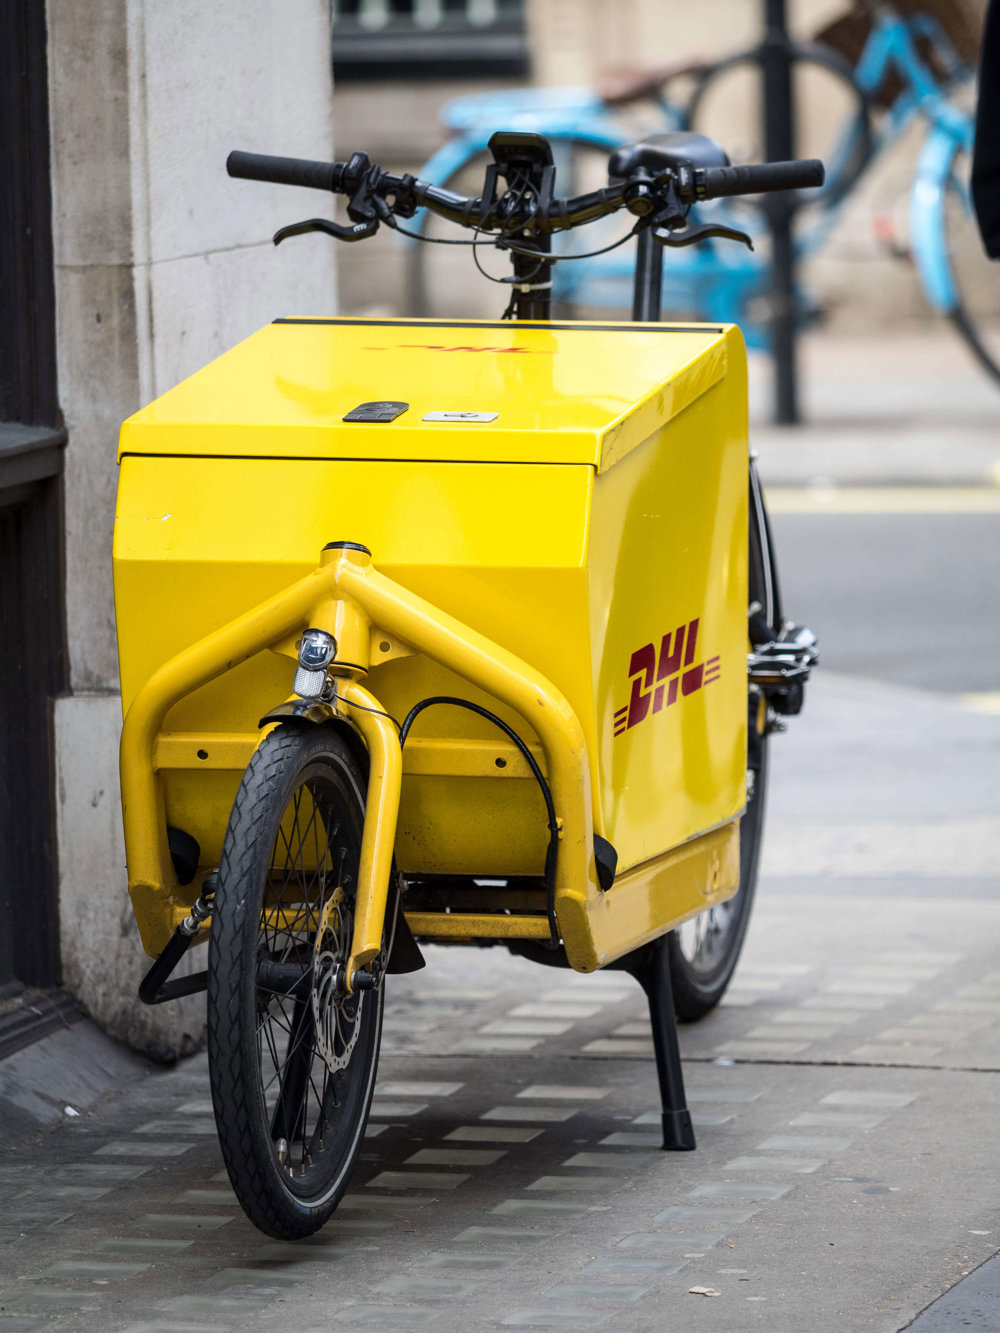 DHL Delivery Bike parked up on the pavement